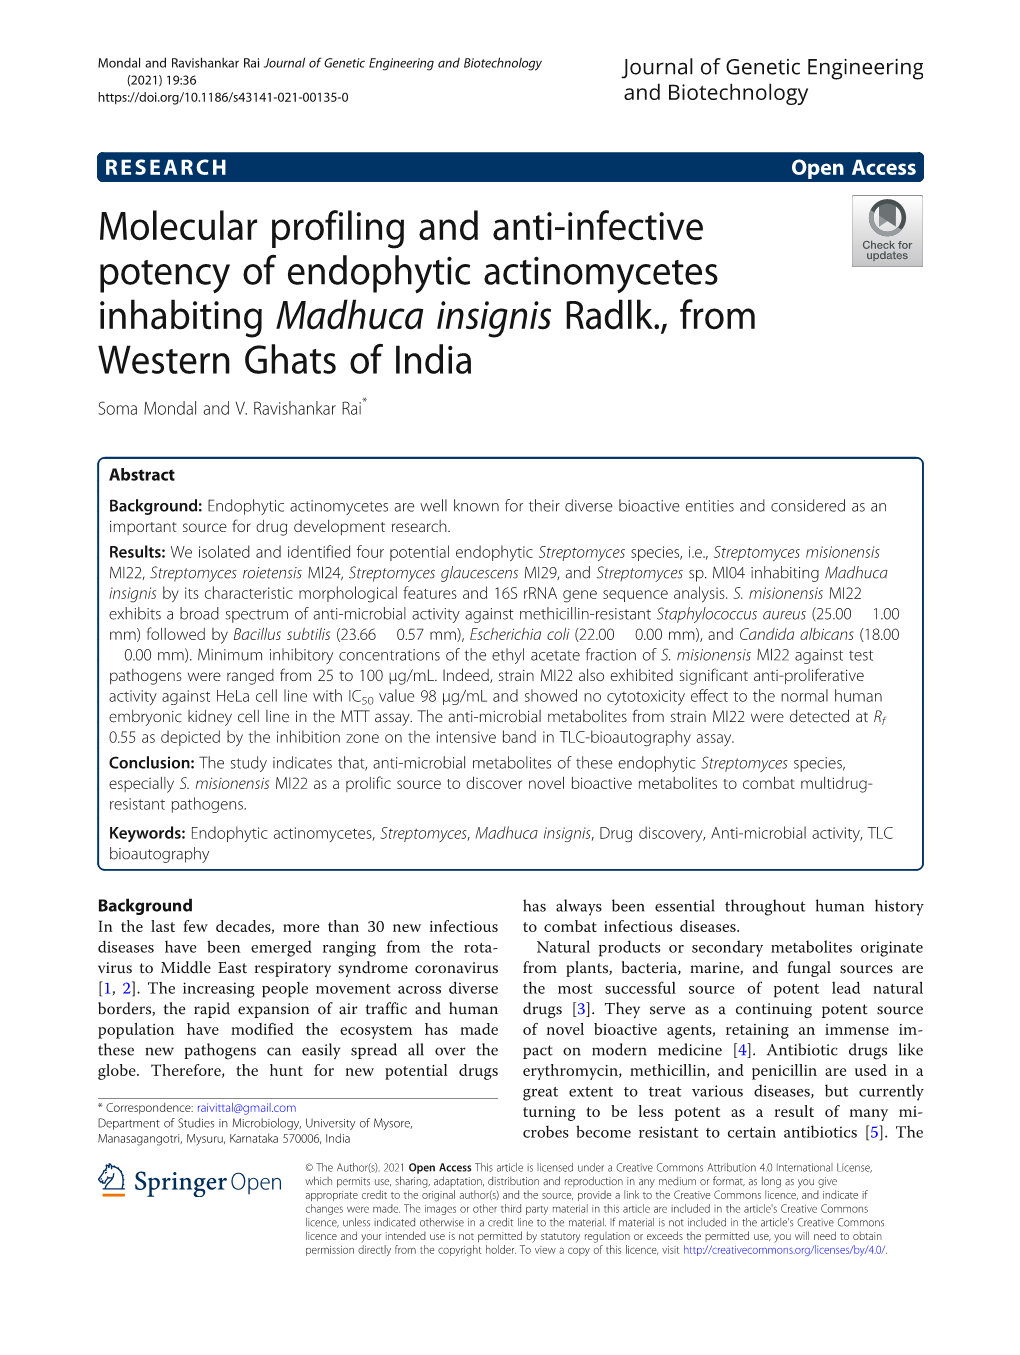 Molecular Profiling and Anti-Infective Potency of Endophytic Actinomycetes Inhabiting Madhuca Insignis Radlk., from Western Ghats of India Soma Mondal and V